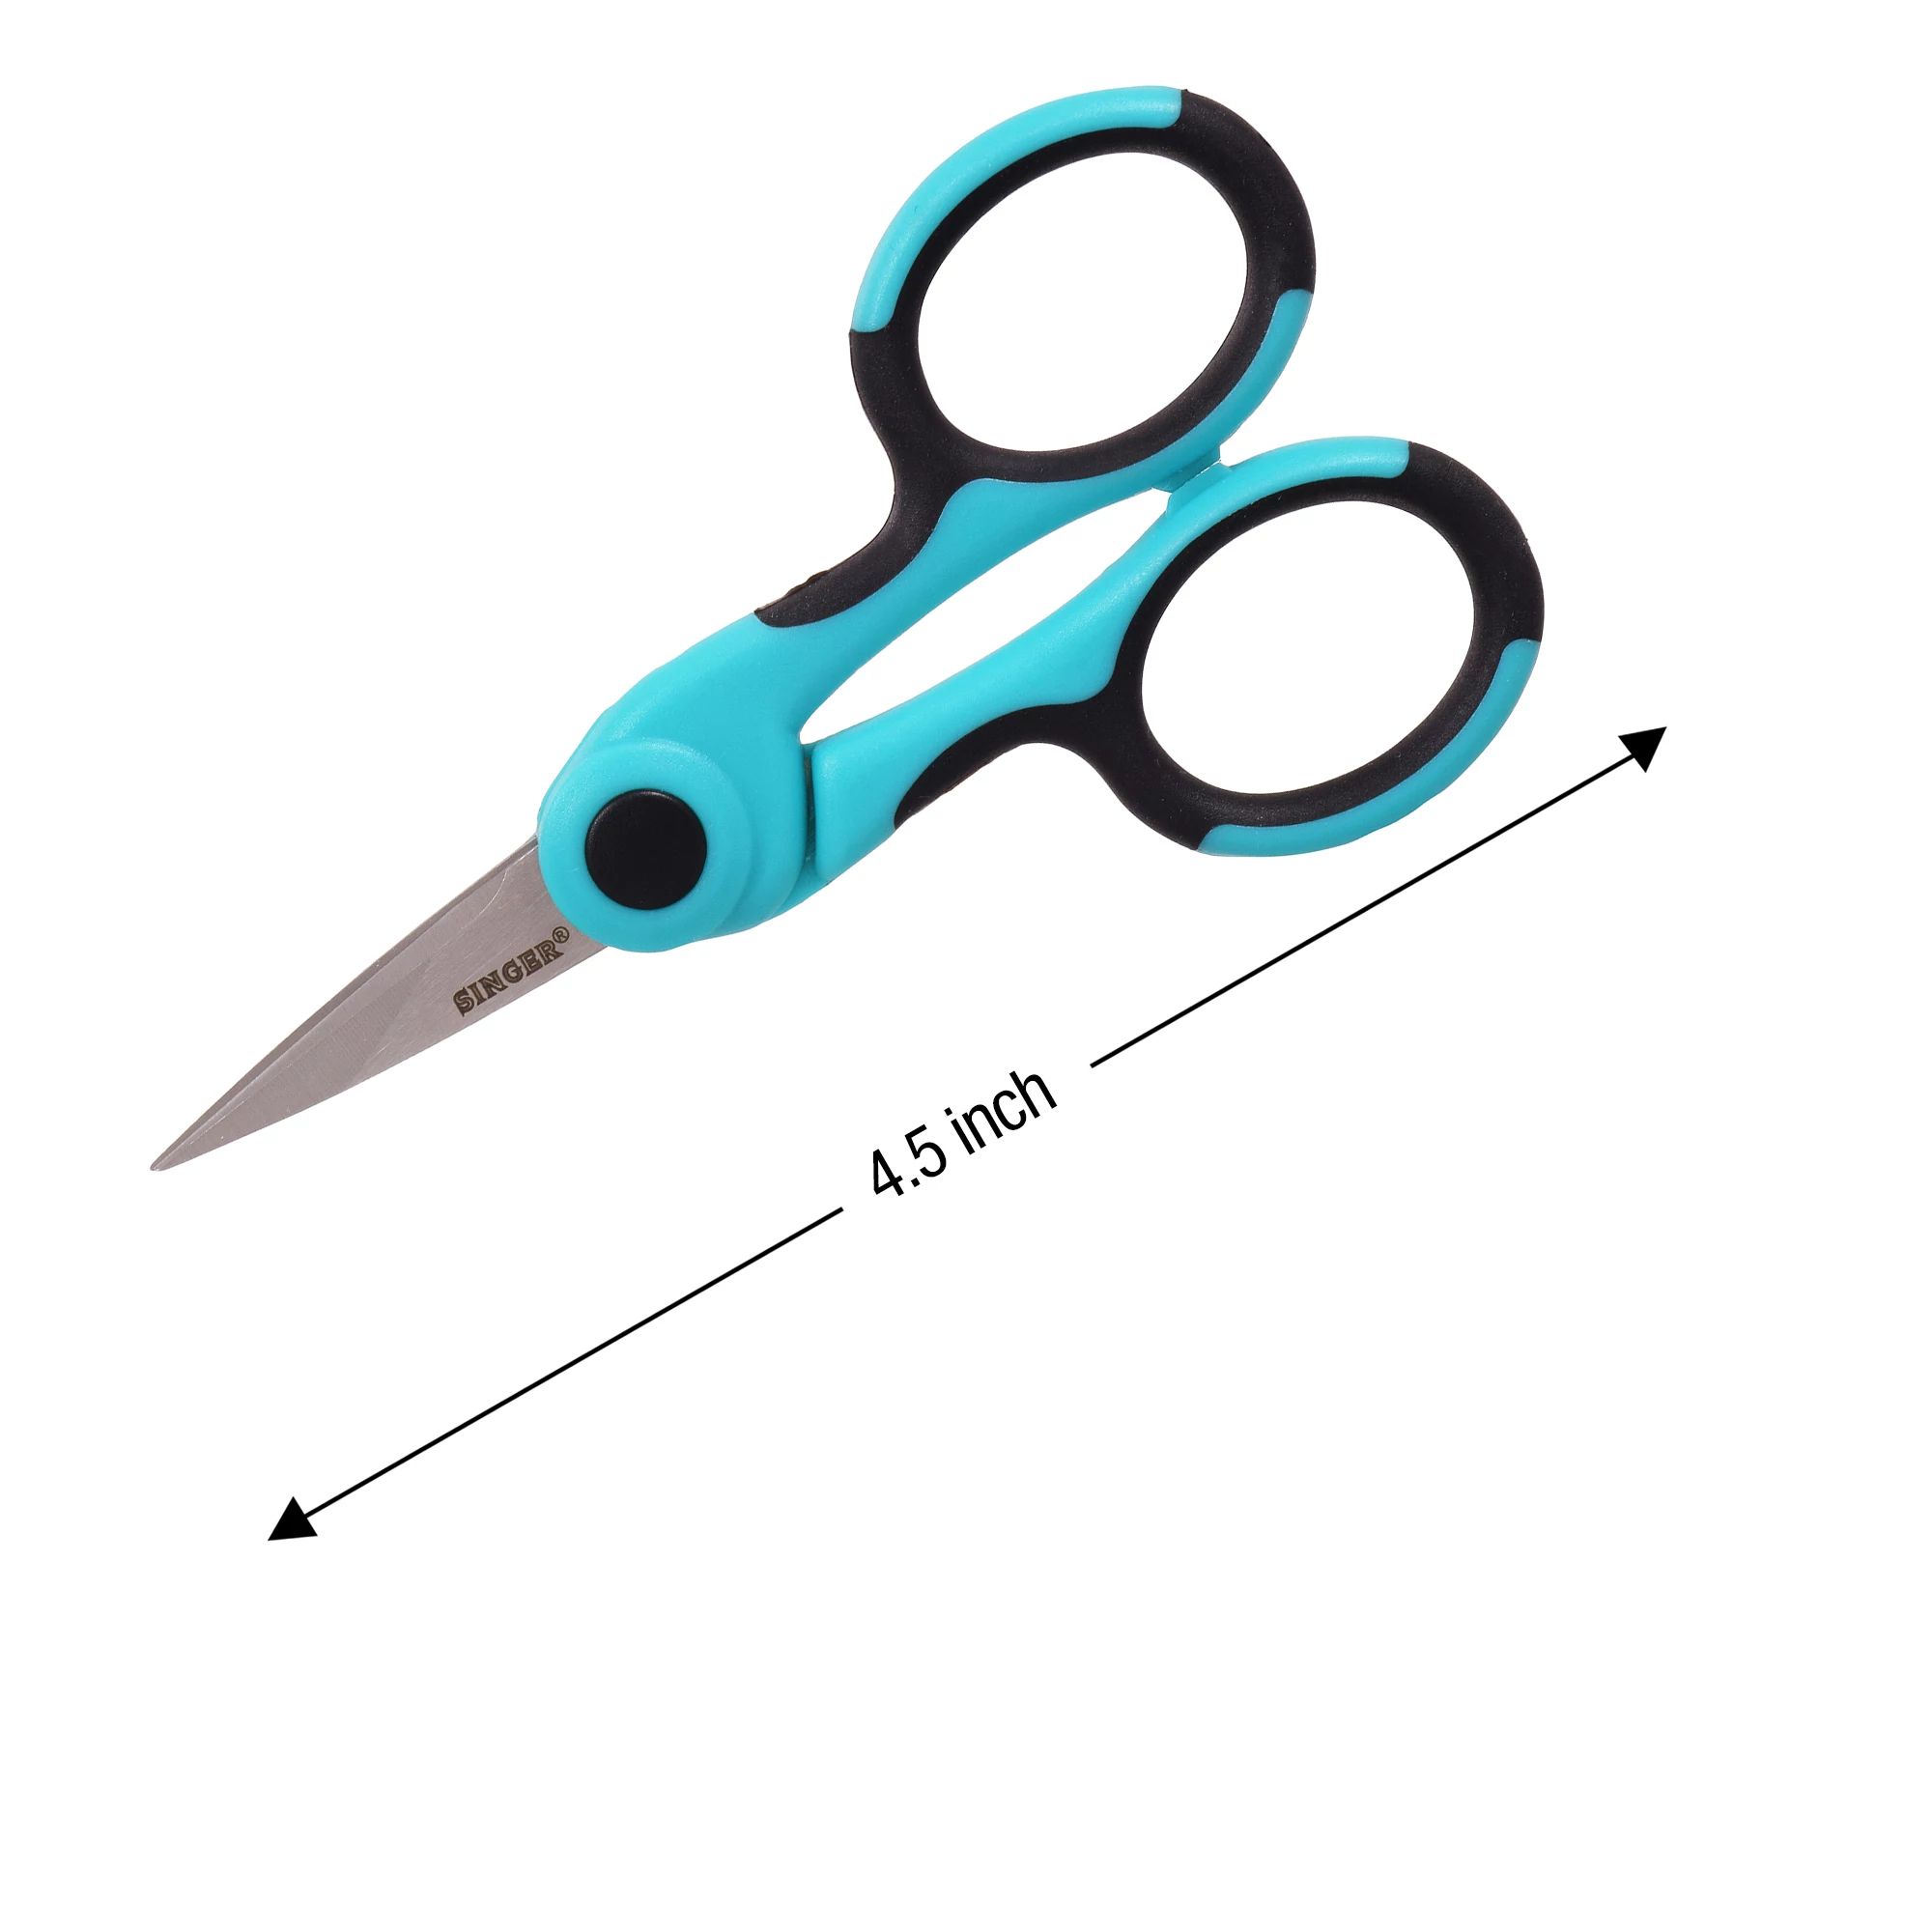 SINGER ProSeries Sewing Scissors Bundle, 8.5 Heavy Duty Fabric Scissors,  4.5 Detail Embroidery Scissors, 5 Thread Snips with Comfort Grip